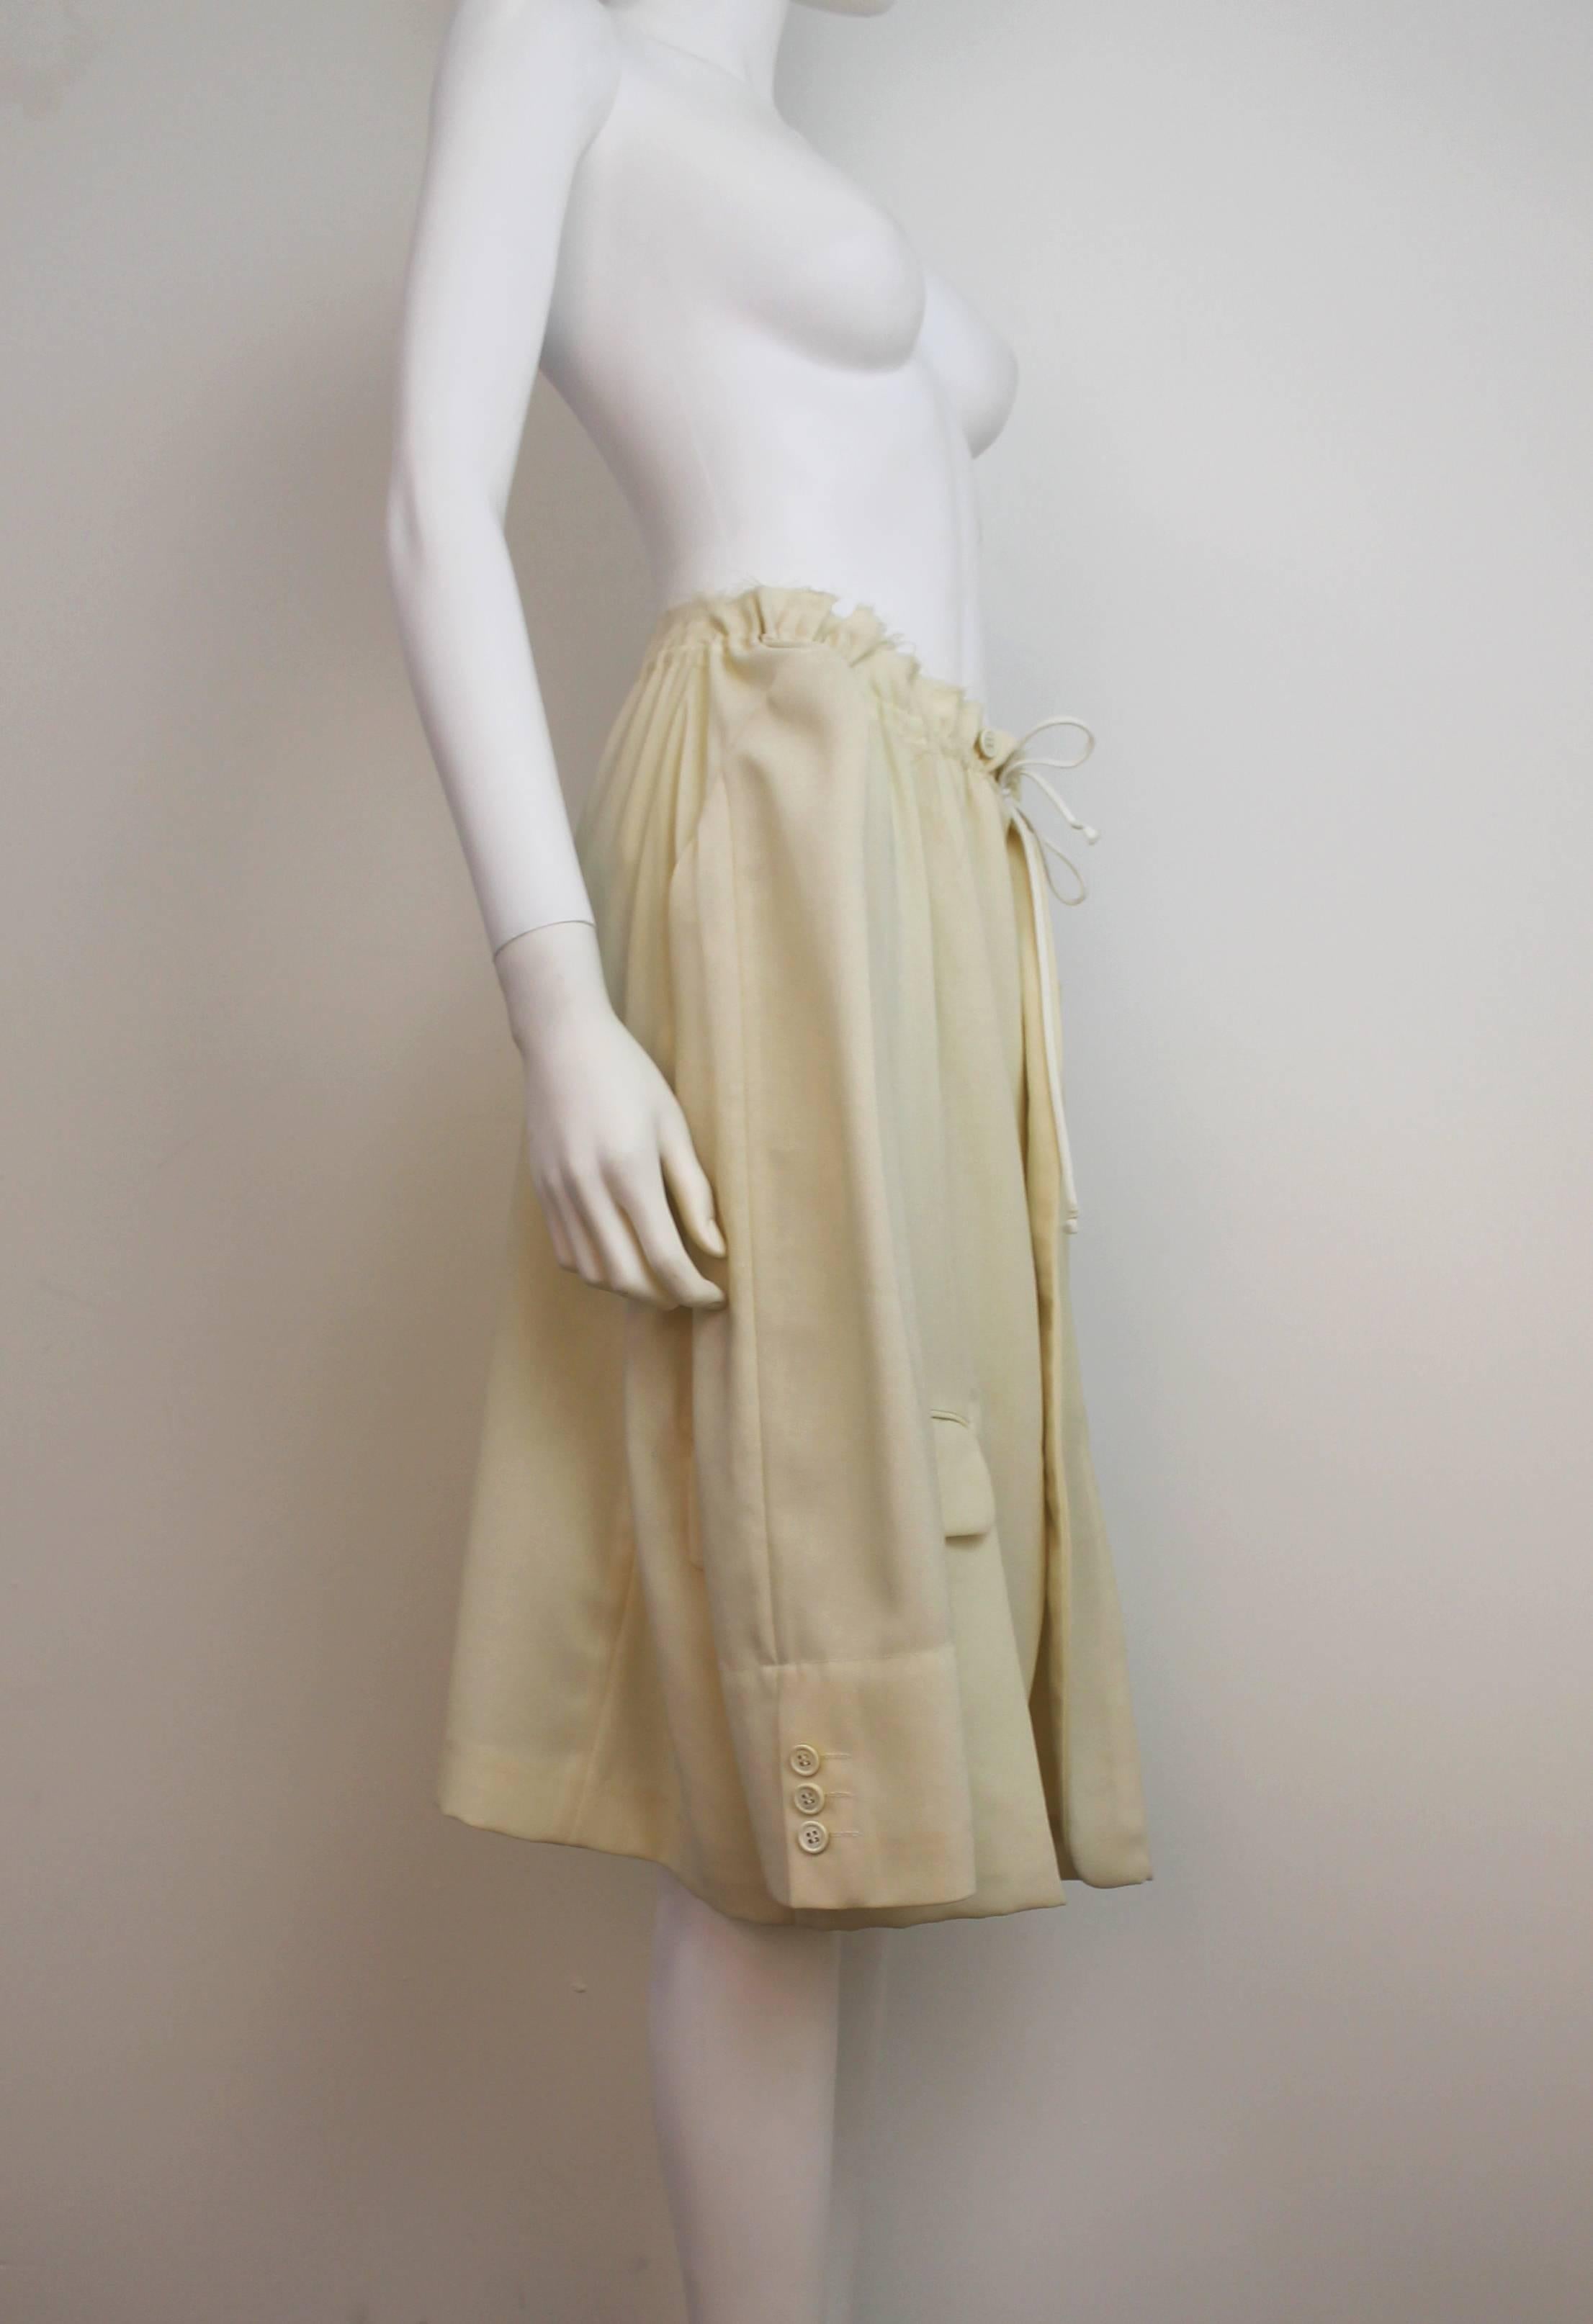 Cream Comme des Garcons jacket/skirt, which features a drawstring neck/waist and frayed edges. Can be worn as either a jacket or a skirt. From Spring/Summer 2001.
